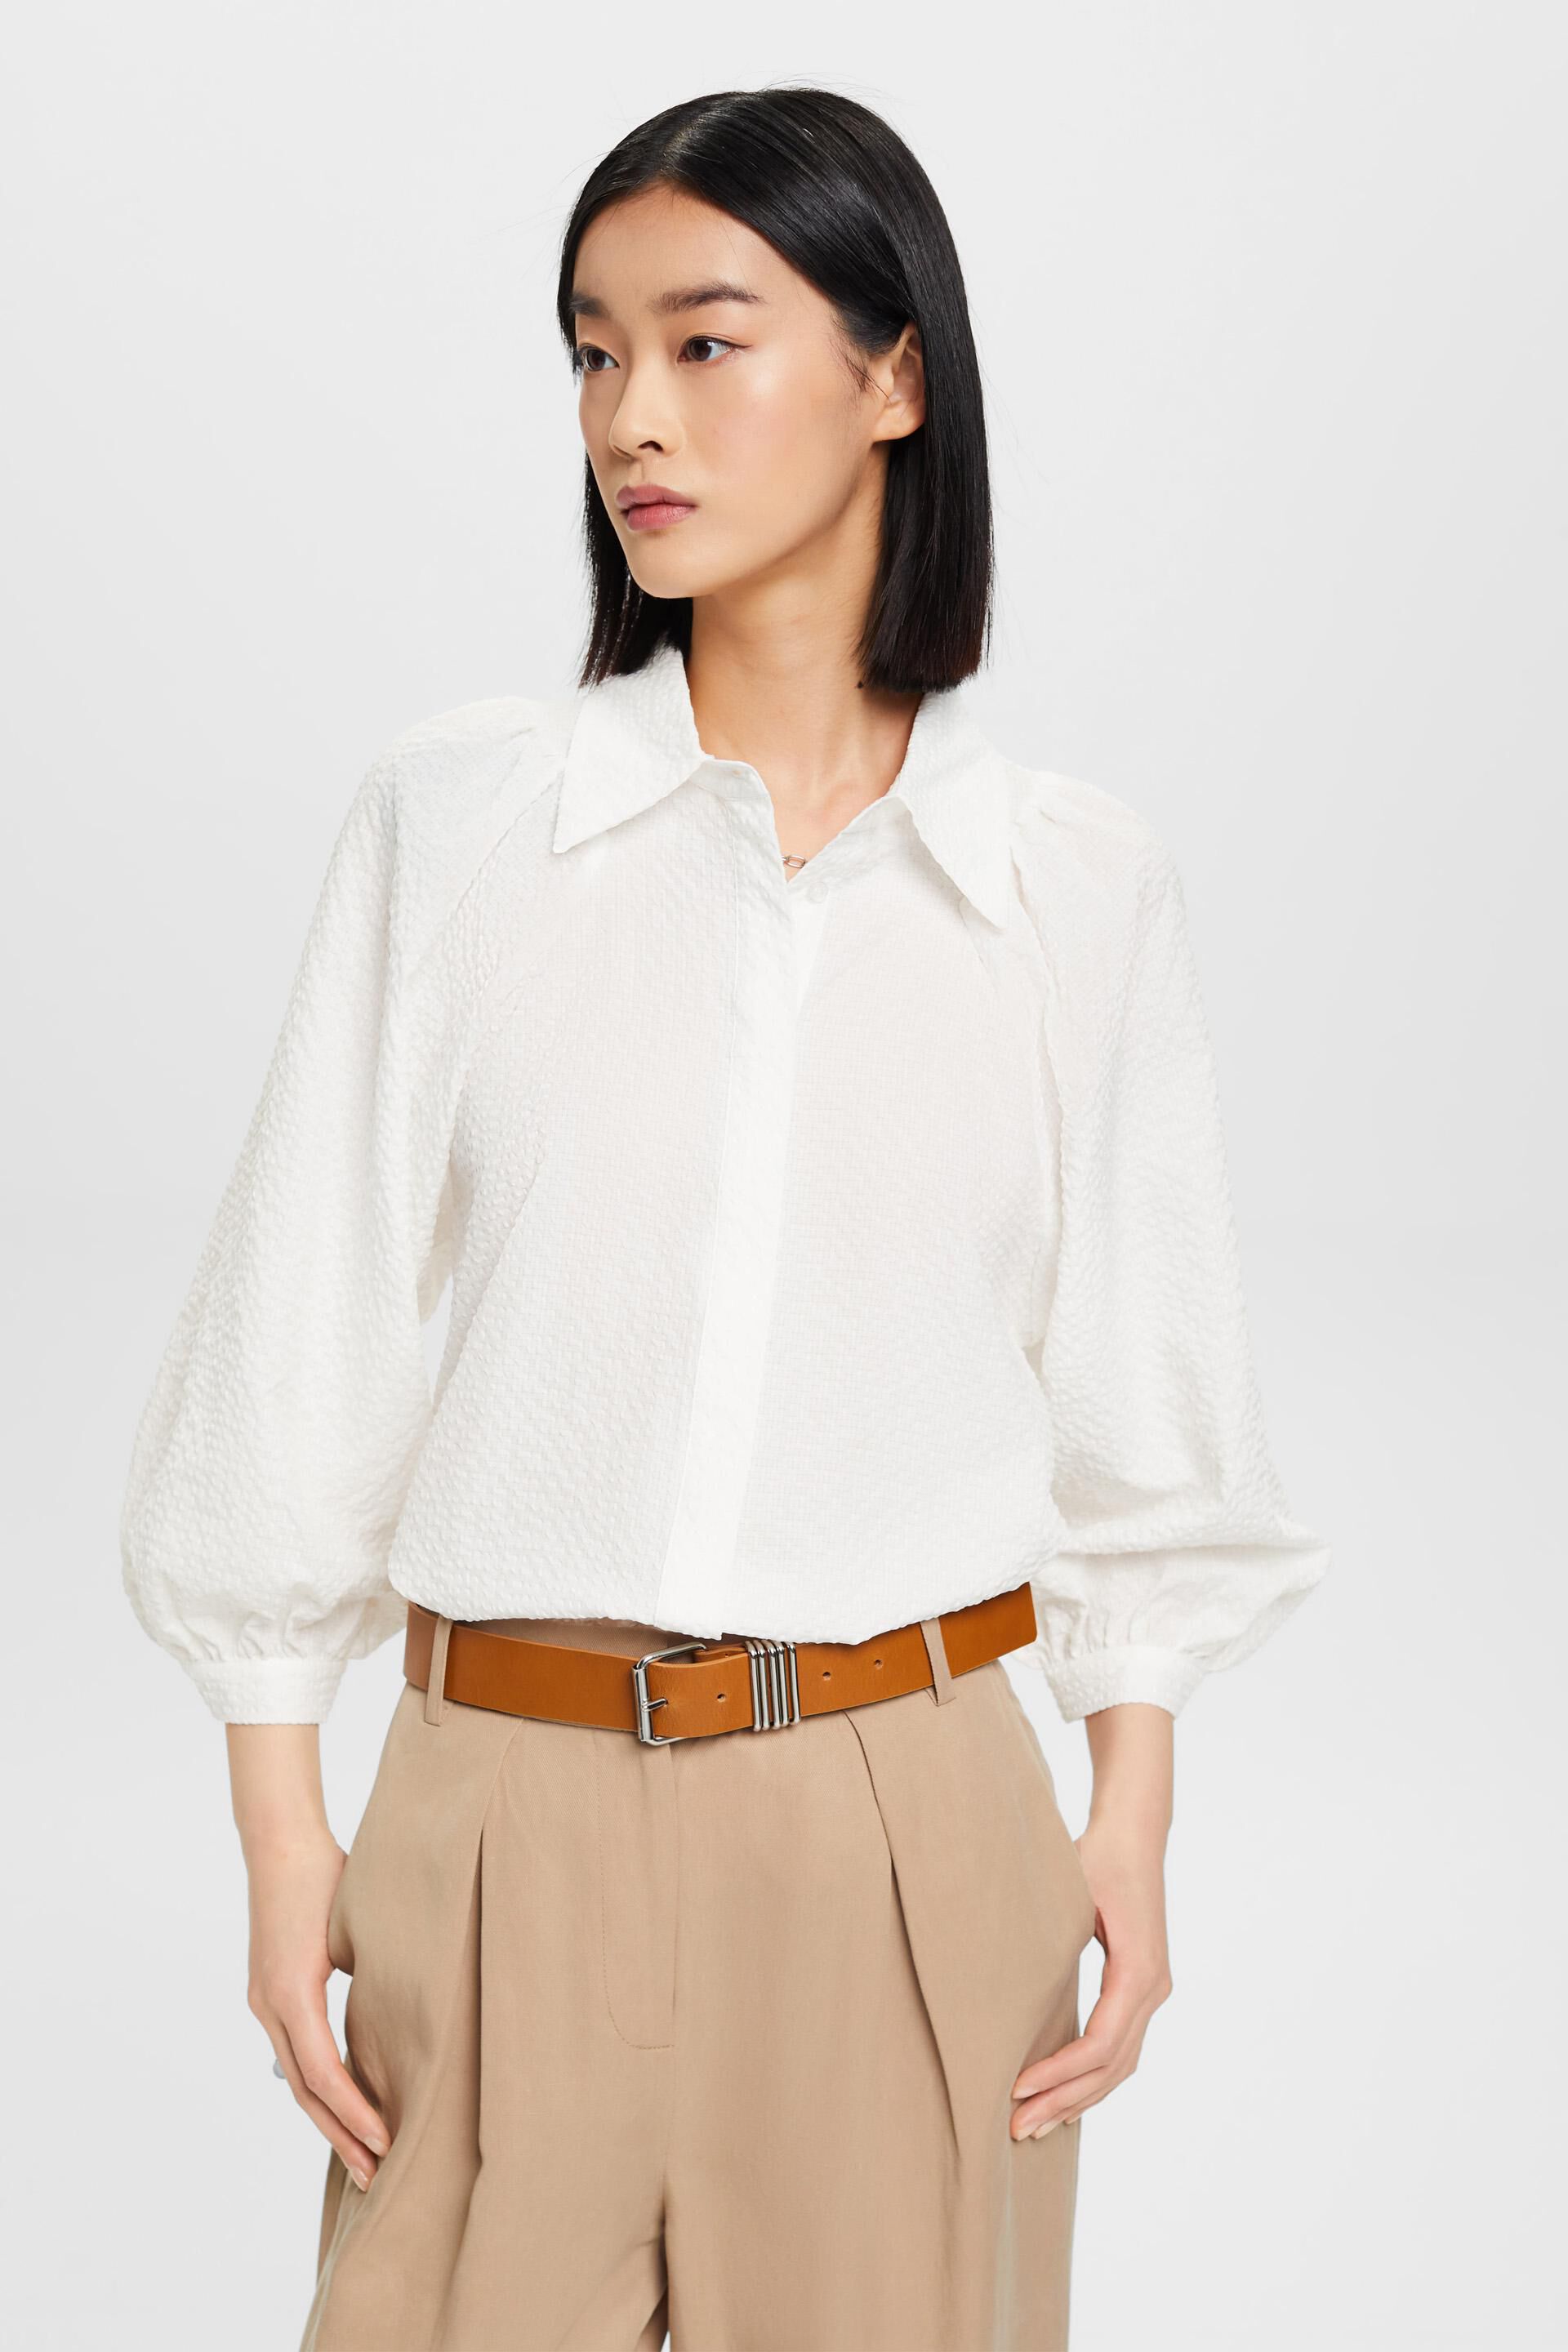 ESPRIT - Seersucker blouse with puffy sleeves at our online shop